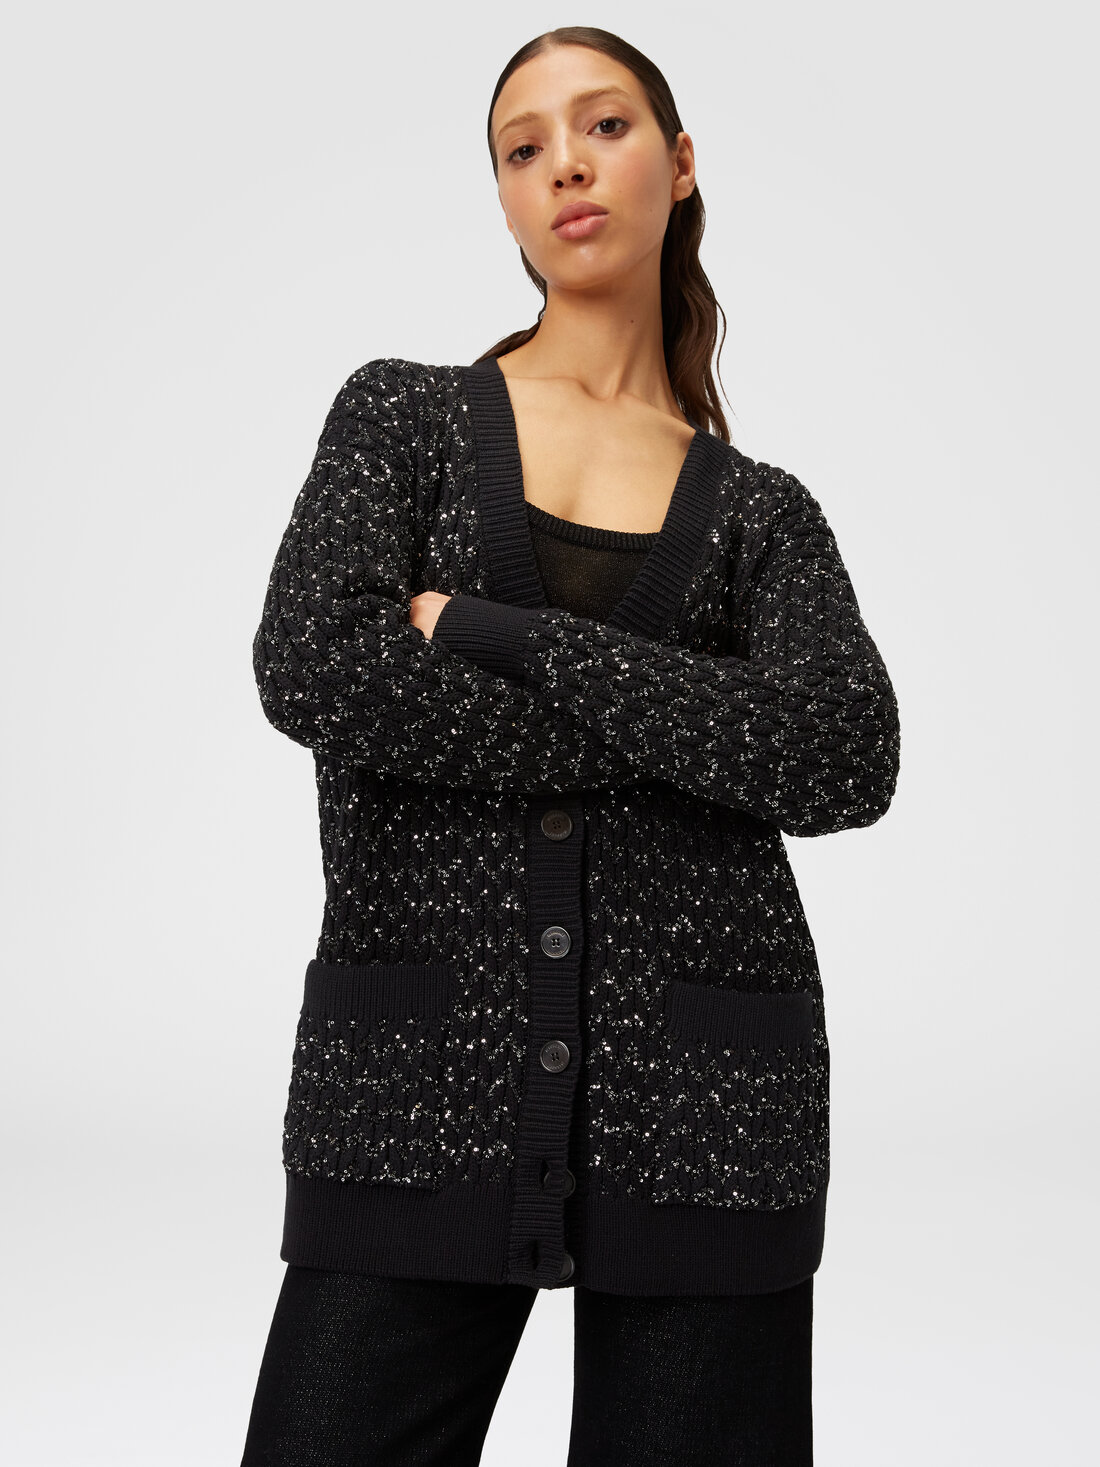 Oversized cardigan in knit with braiding and sequins, Black    - DS24SM0GBK033OS90DI - 3